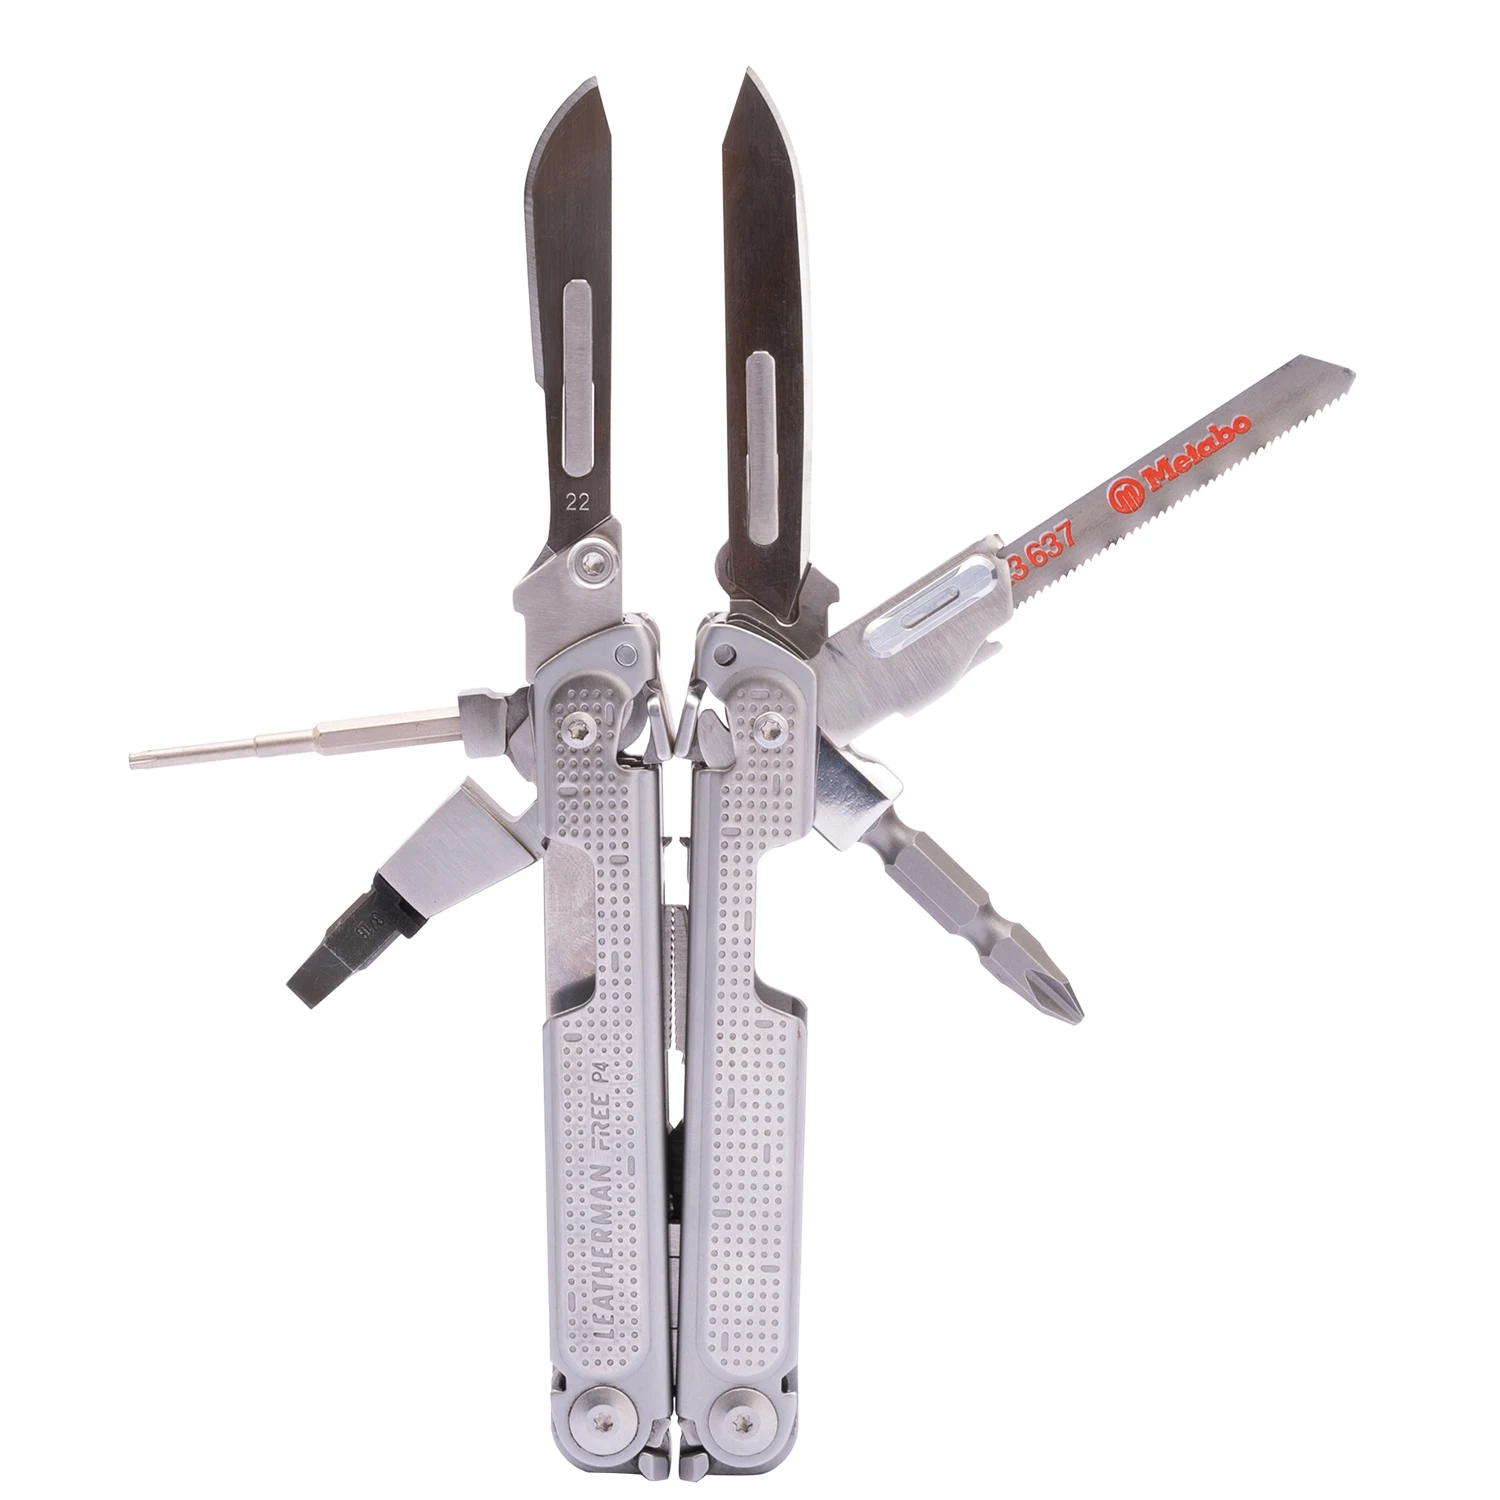 For Leatherman Free P2 P4 Series Saw Holder T-Shank Blade Scalpel DIY Modified Parts Pliers Tool Multifunction